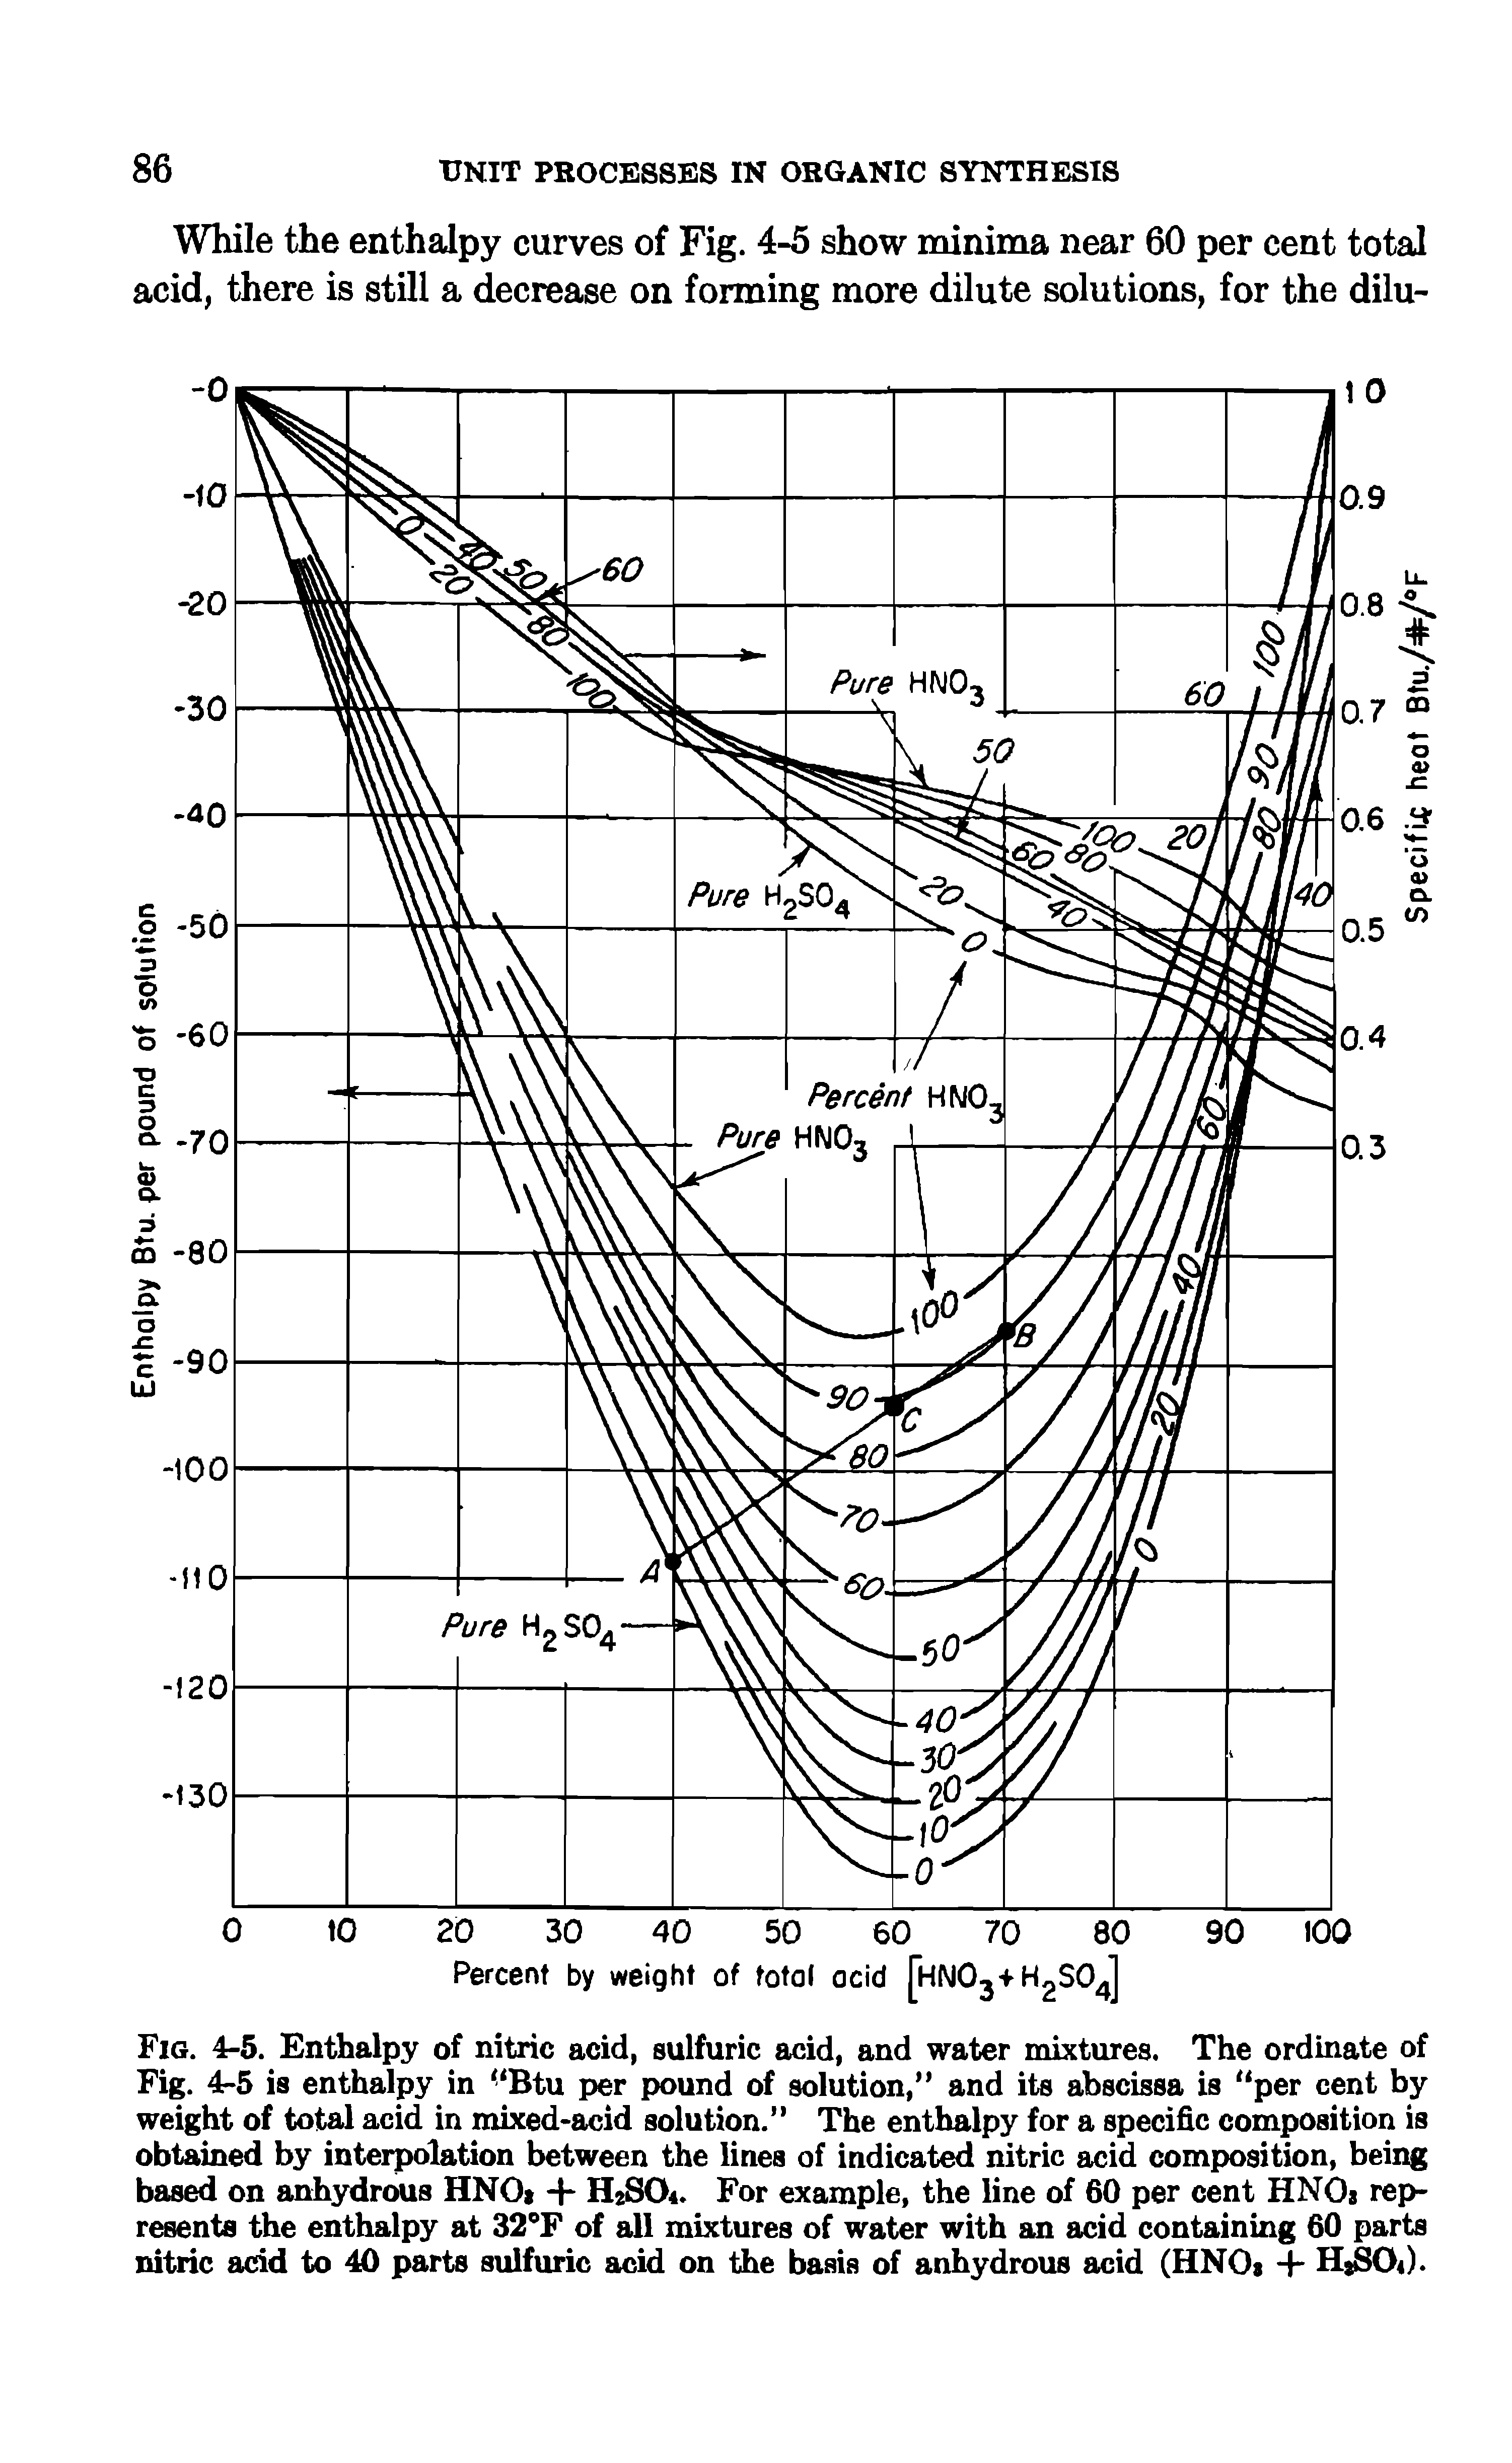 Fig. 4-5. Enthalpy of nitric acid, sulfuric acid, and water mixtures. The ordinate of Fig. 4-5 is enthalpy in Btu per pound of solution, and its abscissa is per cent by weight of total acid in mixed-acid solution. The enthalpy for a specific composition is obtained by interpolation between the lines of indicated nitric acid composition, being based on anhydrous HNO H2S04. For example, the line of 60 per cent HNOs represents the enthalpy at 32 F of all mixtures of water with an acid containing 60 parts nitric acid to 40 parts sulfuric acid on the basis of anhydrous acid (HNOs + HsSOt).